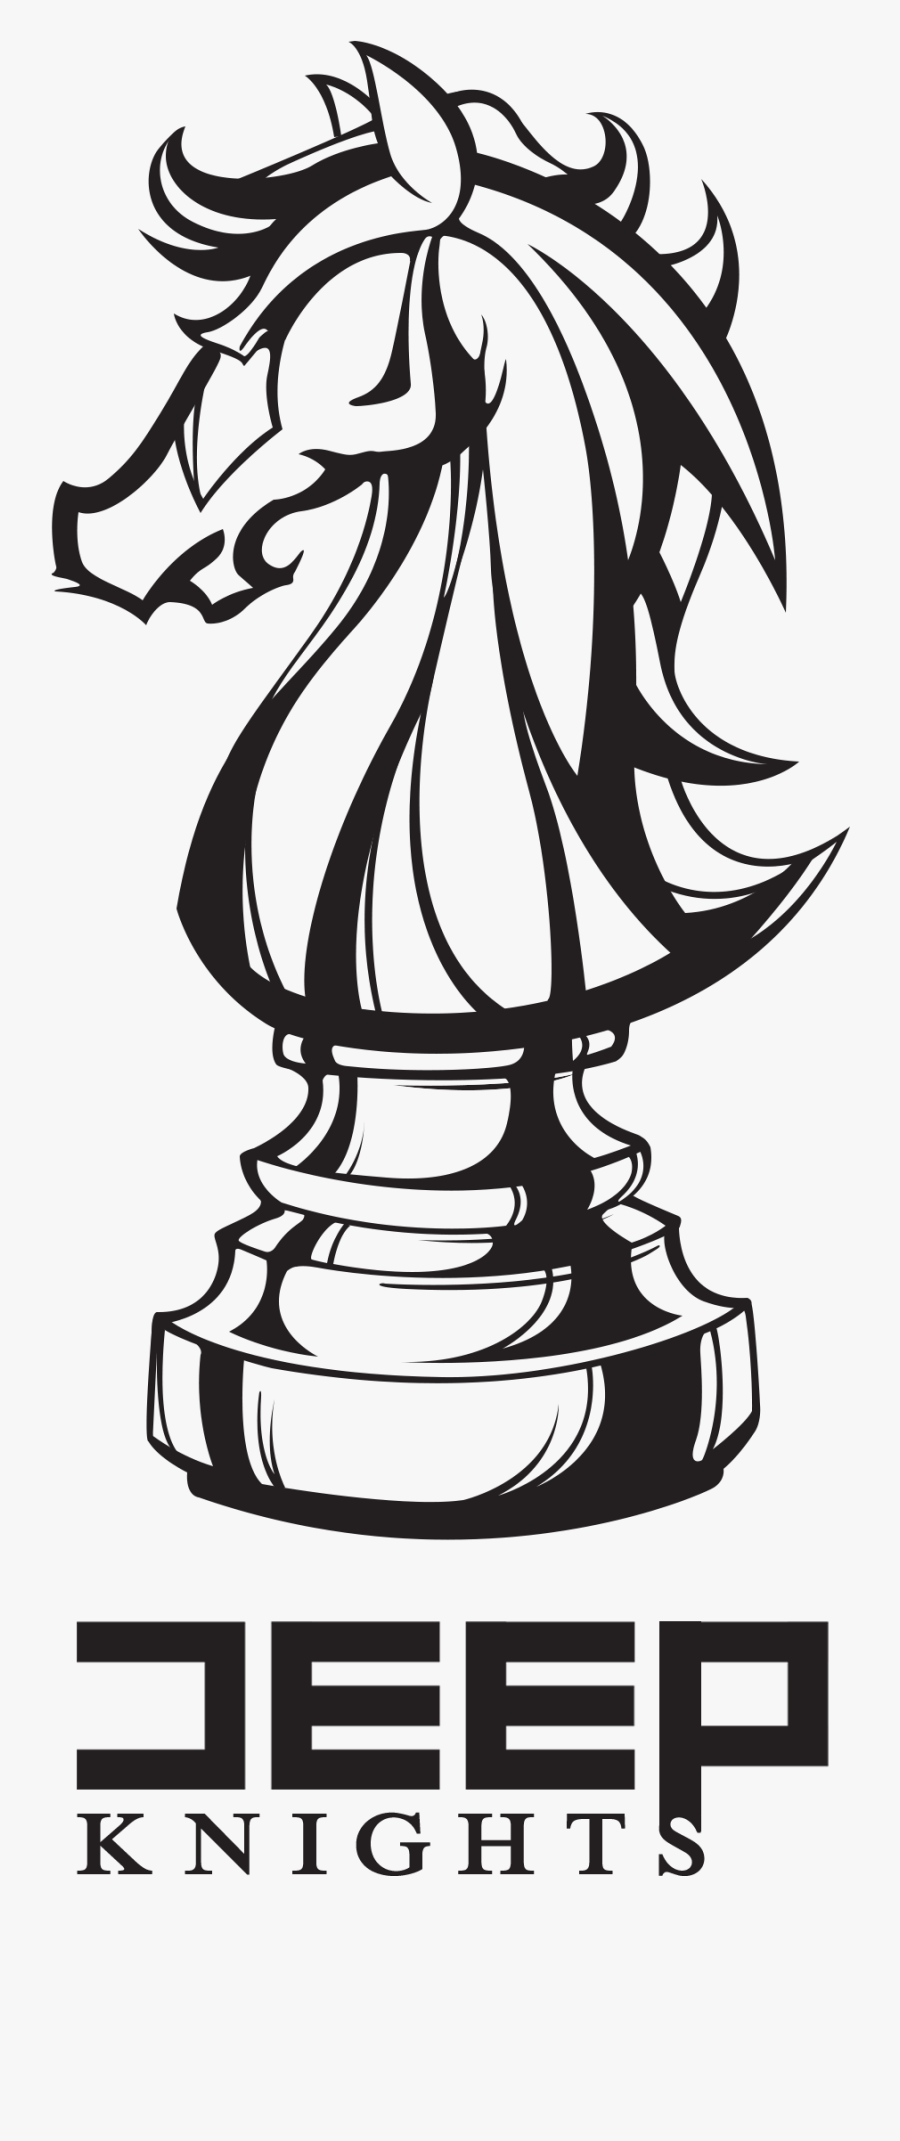 Transparent Knight Logo Png - Knight Chess Piece Drawing, Transparent Clipart